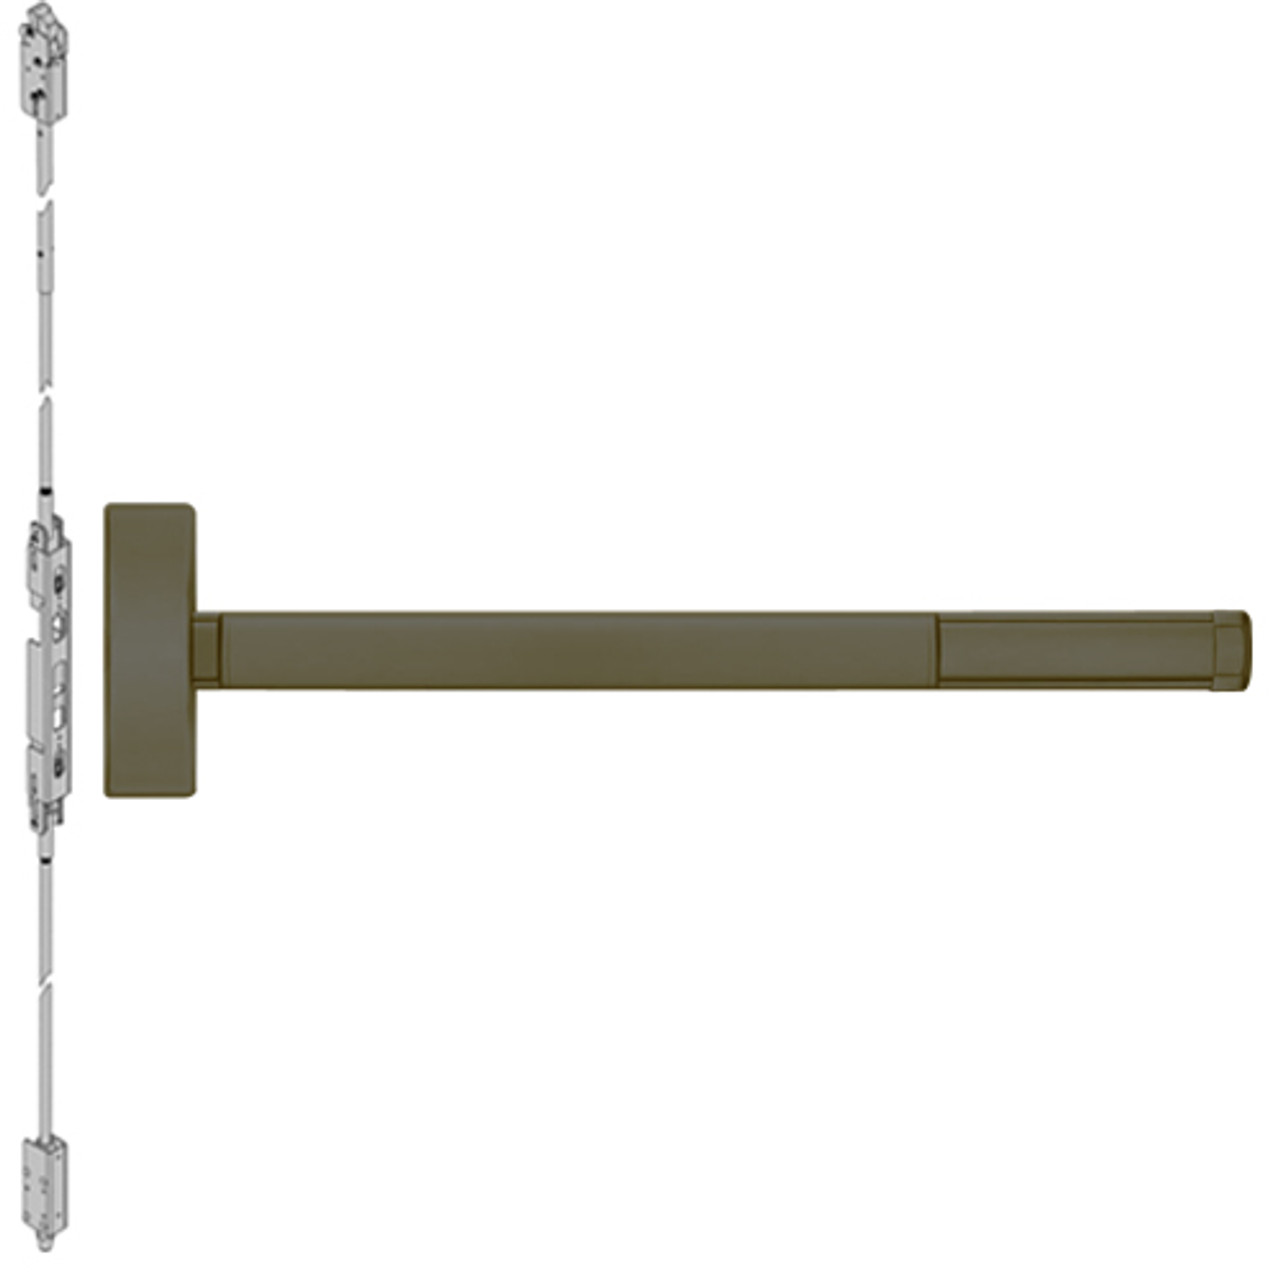 DE2805-613-48 PHI 2800 Series Concealed Vertical Rod Exit Device with Delayed Egress Prepped for Key Controls Thumb Piece in Oil Rubbed Bronze Finish